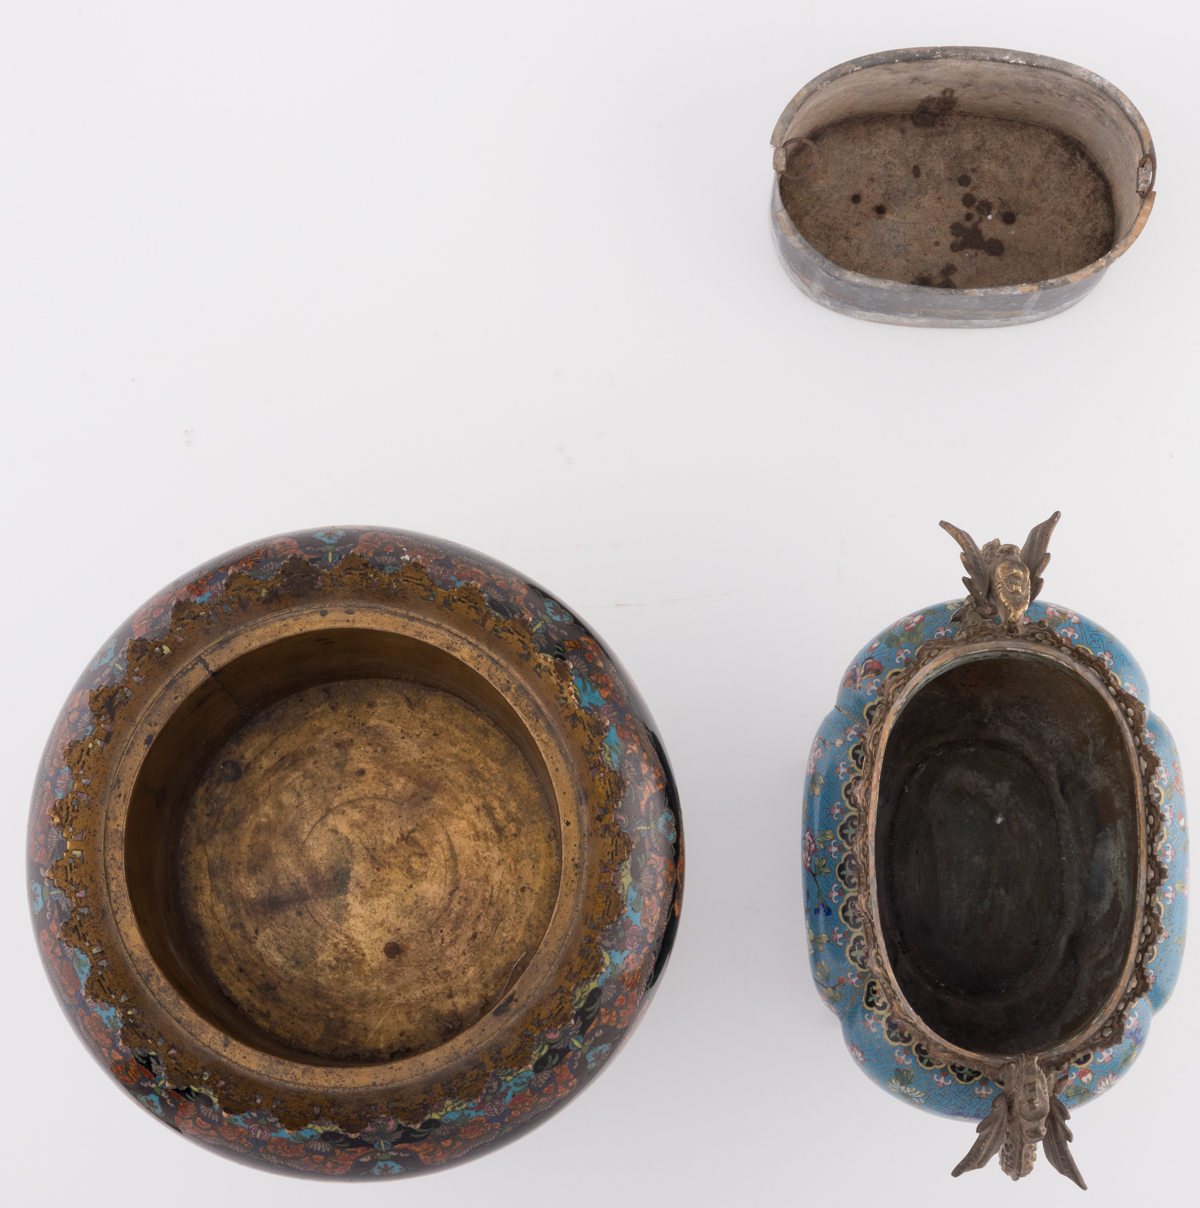 Two Chinese cloisonné enamel jardinieres with bronze mounts, 19th / 20thC, H 27 - 38 - W 31 - ø 29 c - Image 6 of 7